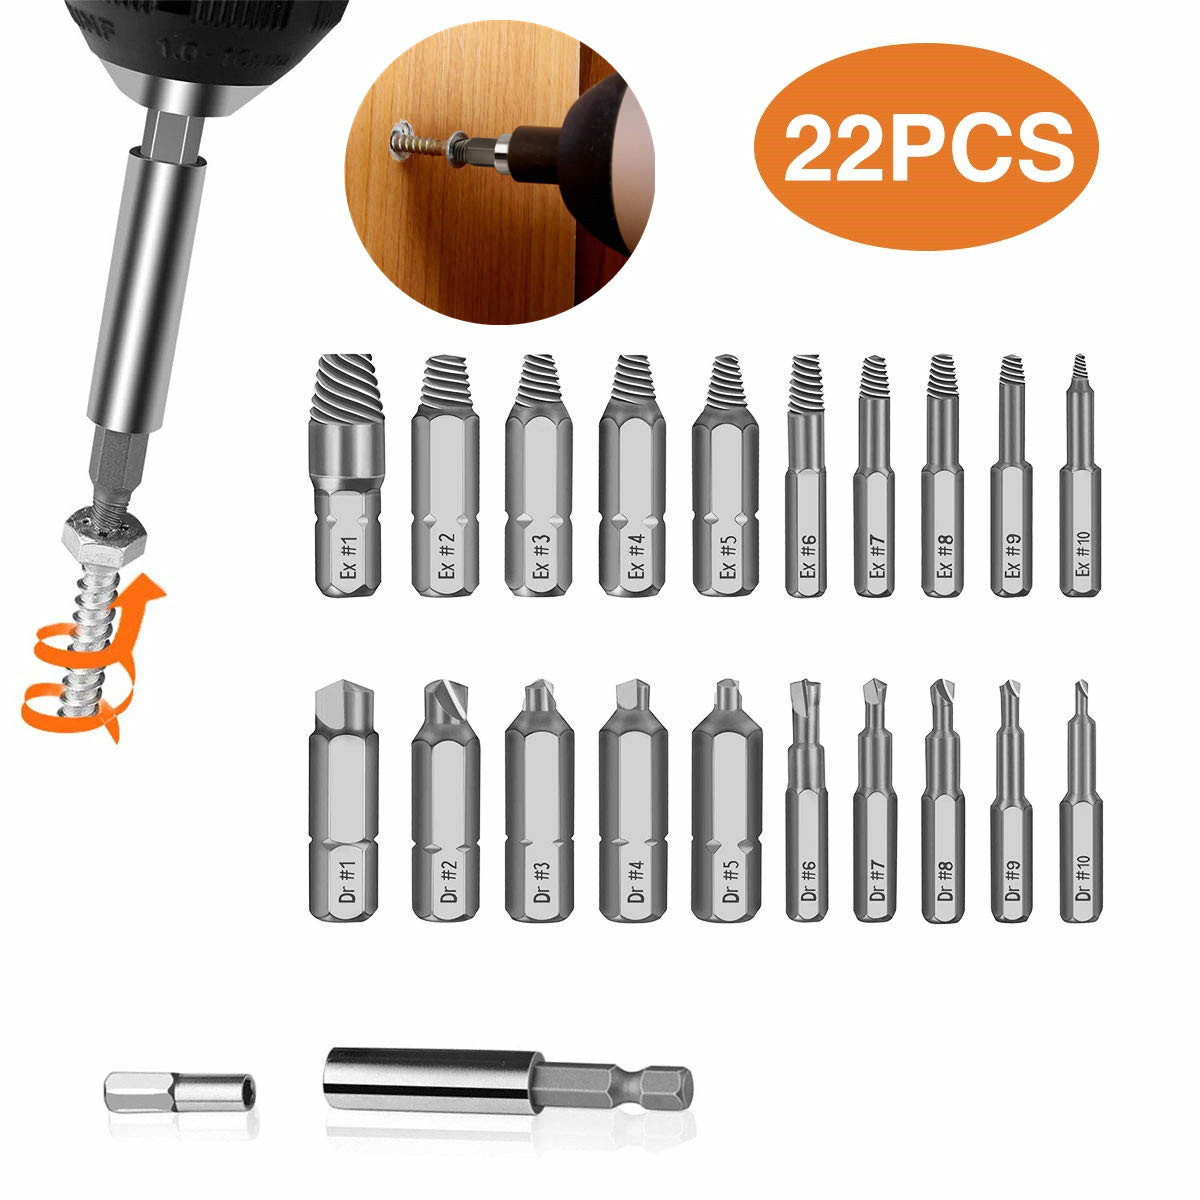 Drillpro-22pcs-Damaged-Screw-Extractor-Set-for-Broken-Screw-HSS-Broken-Bolt-Extractor-Screw-Remover--1584557-1